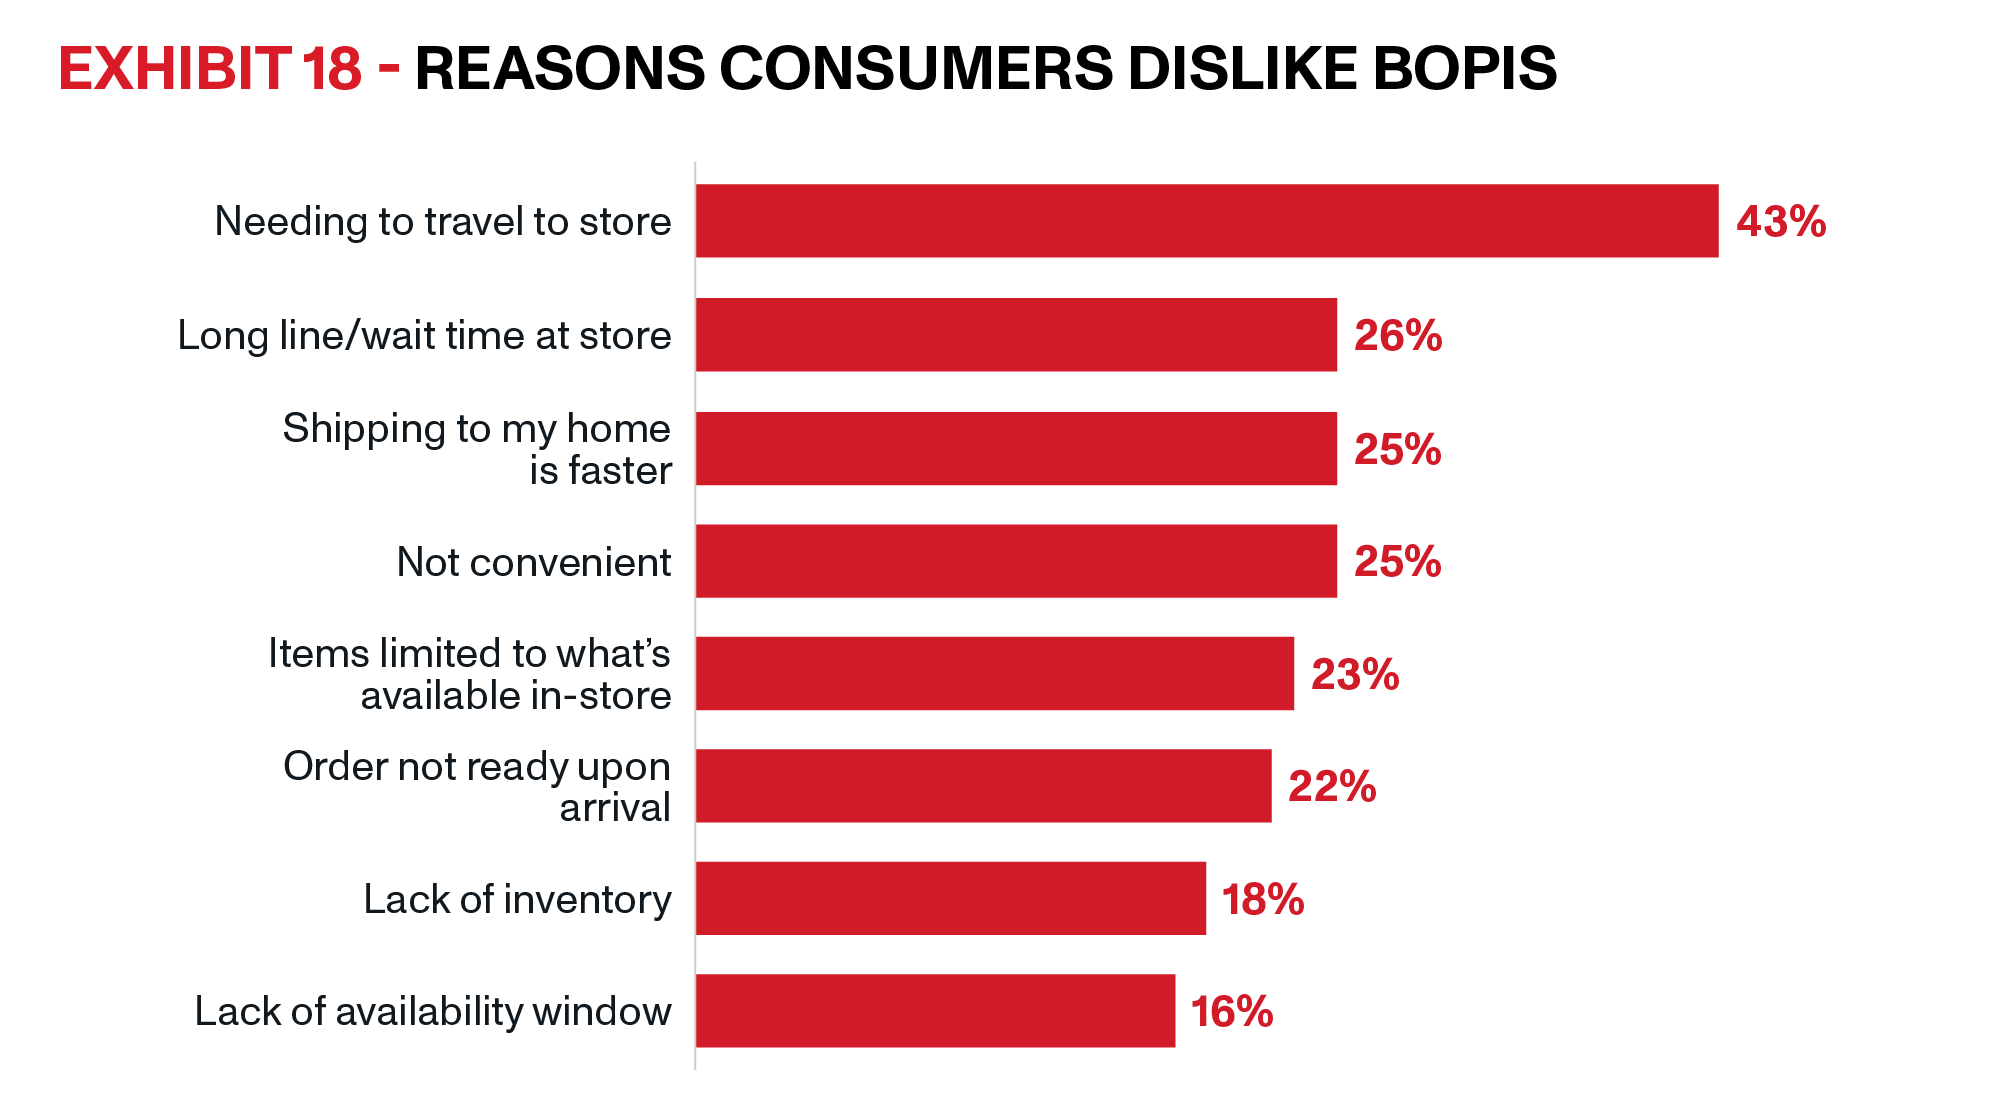 OnTrac | Last Mile E Commerce Delivery Whitepaper | Exhibit 18 | Exhibit 18 shows issues consumers have with BOPIS, with 43% citing the need to travel to the store as the aspect they dislike most.